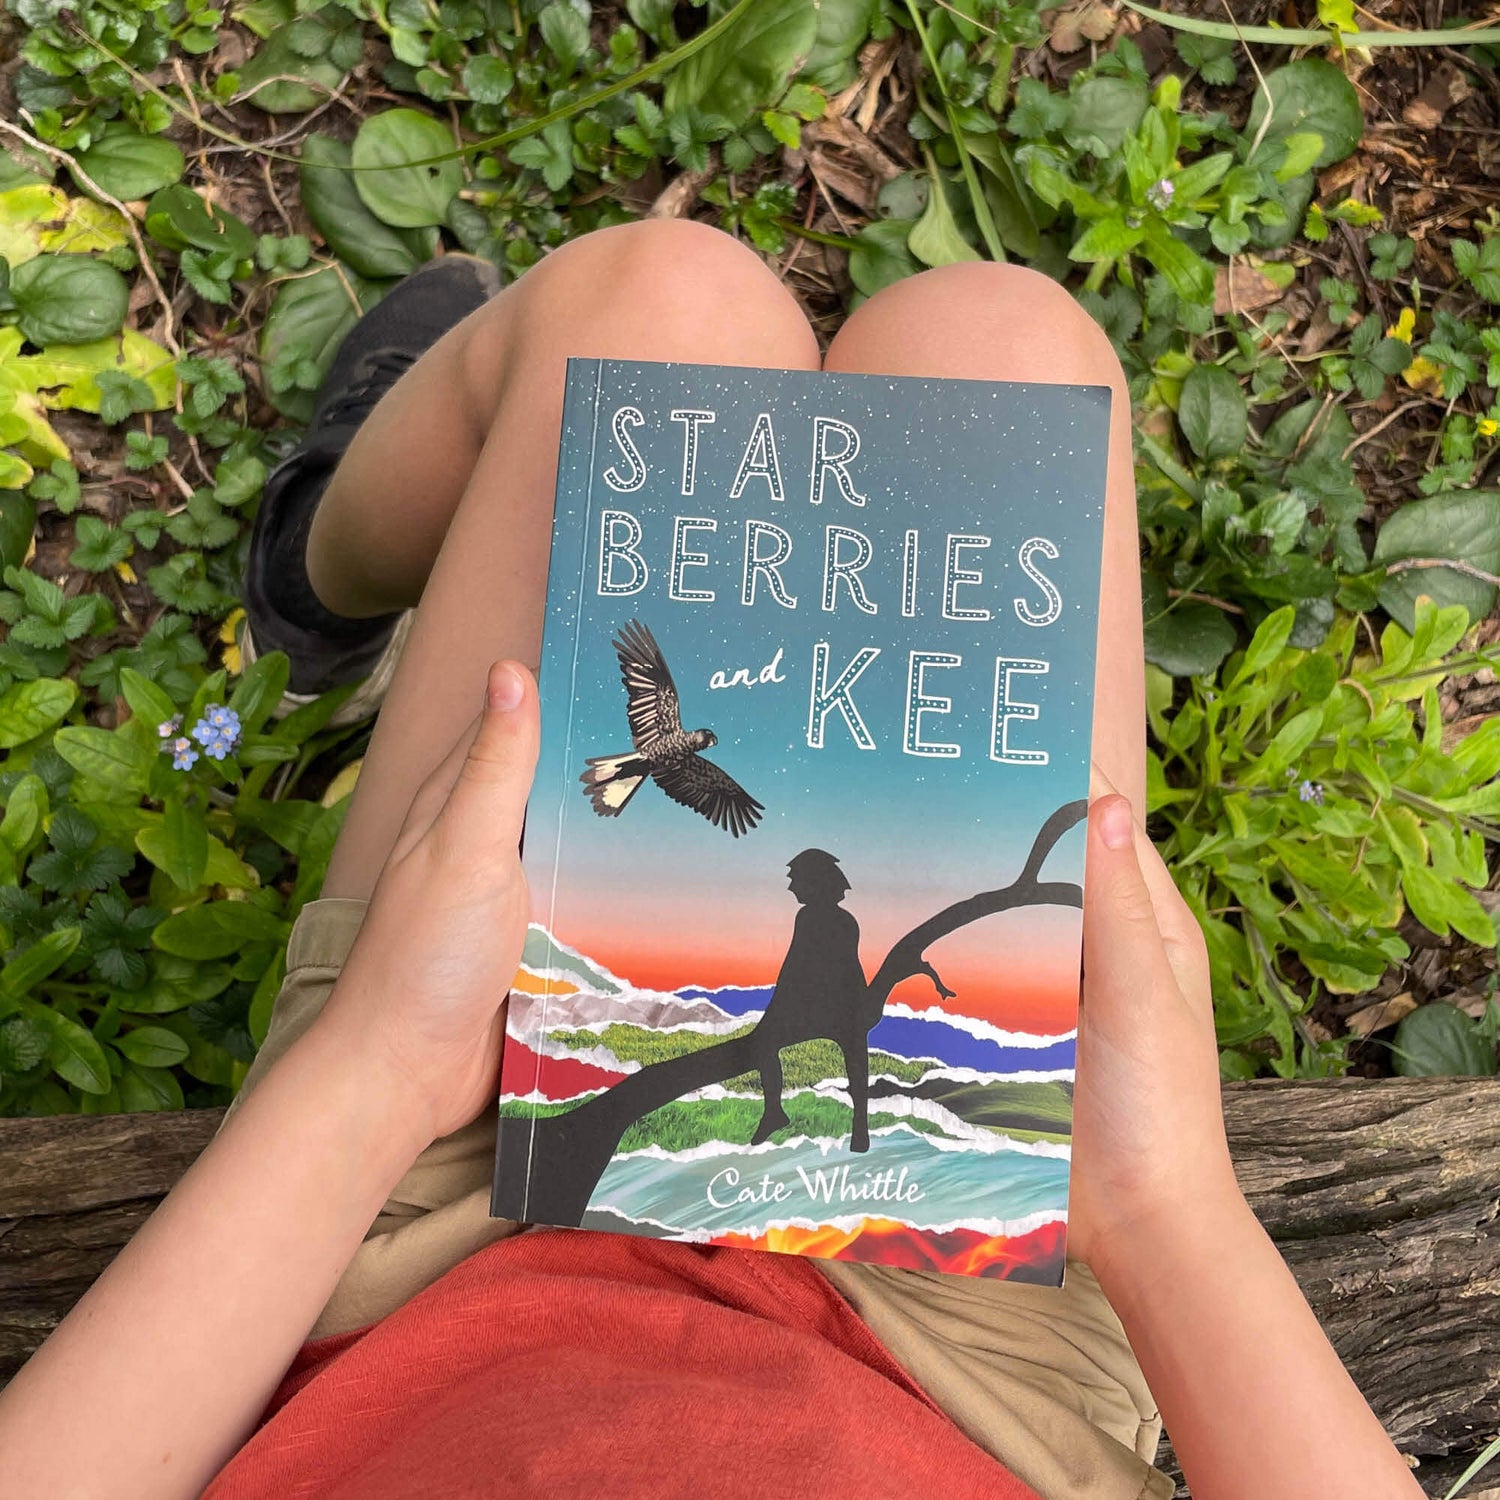 Starberries and Kee Book